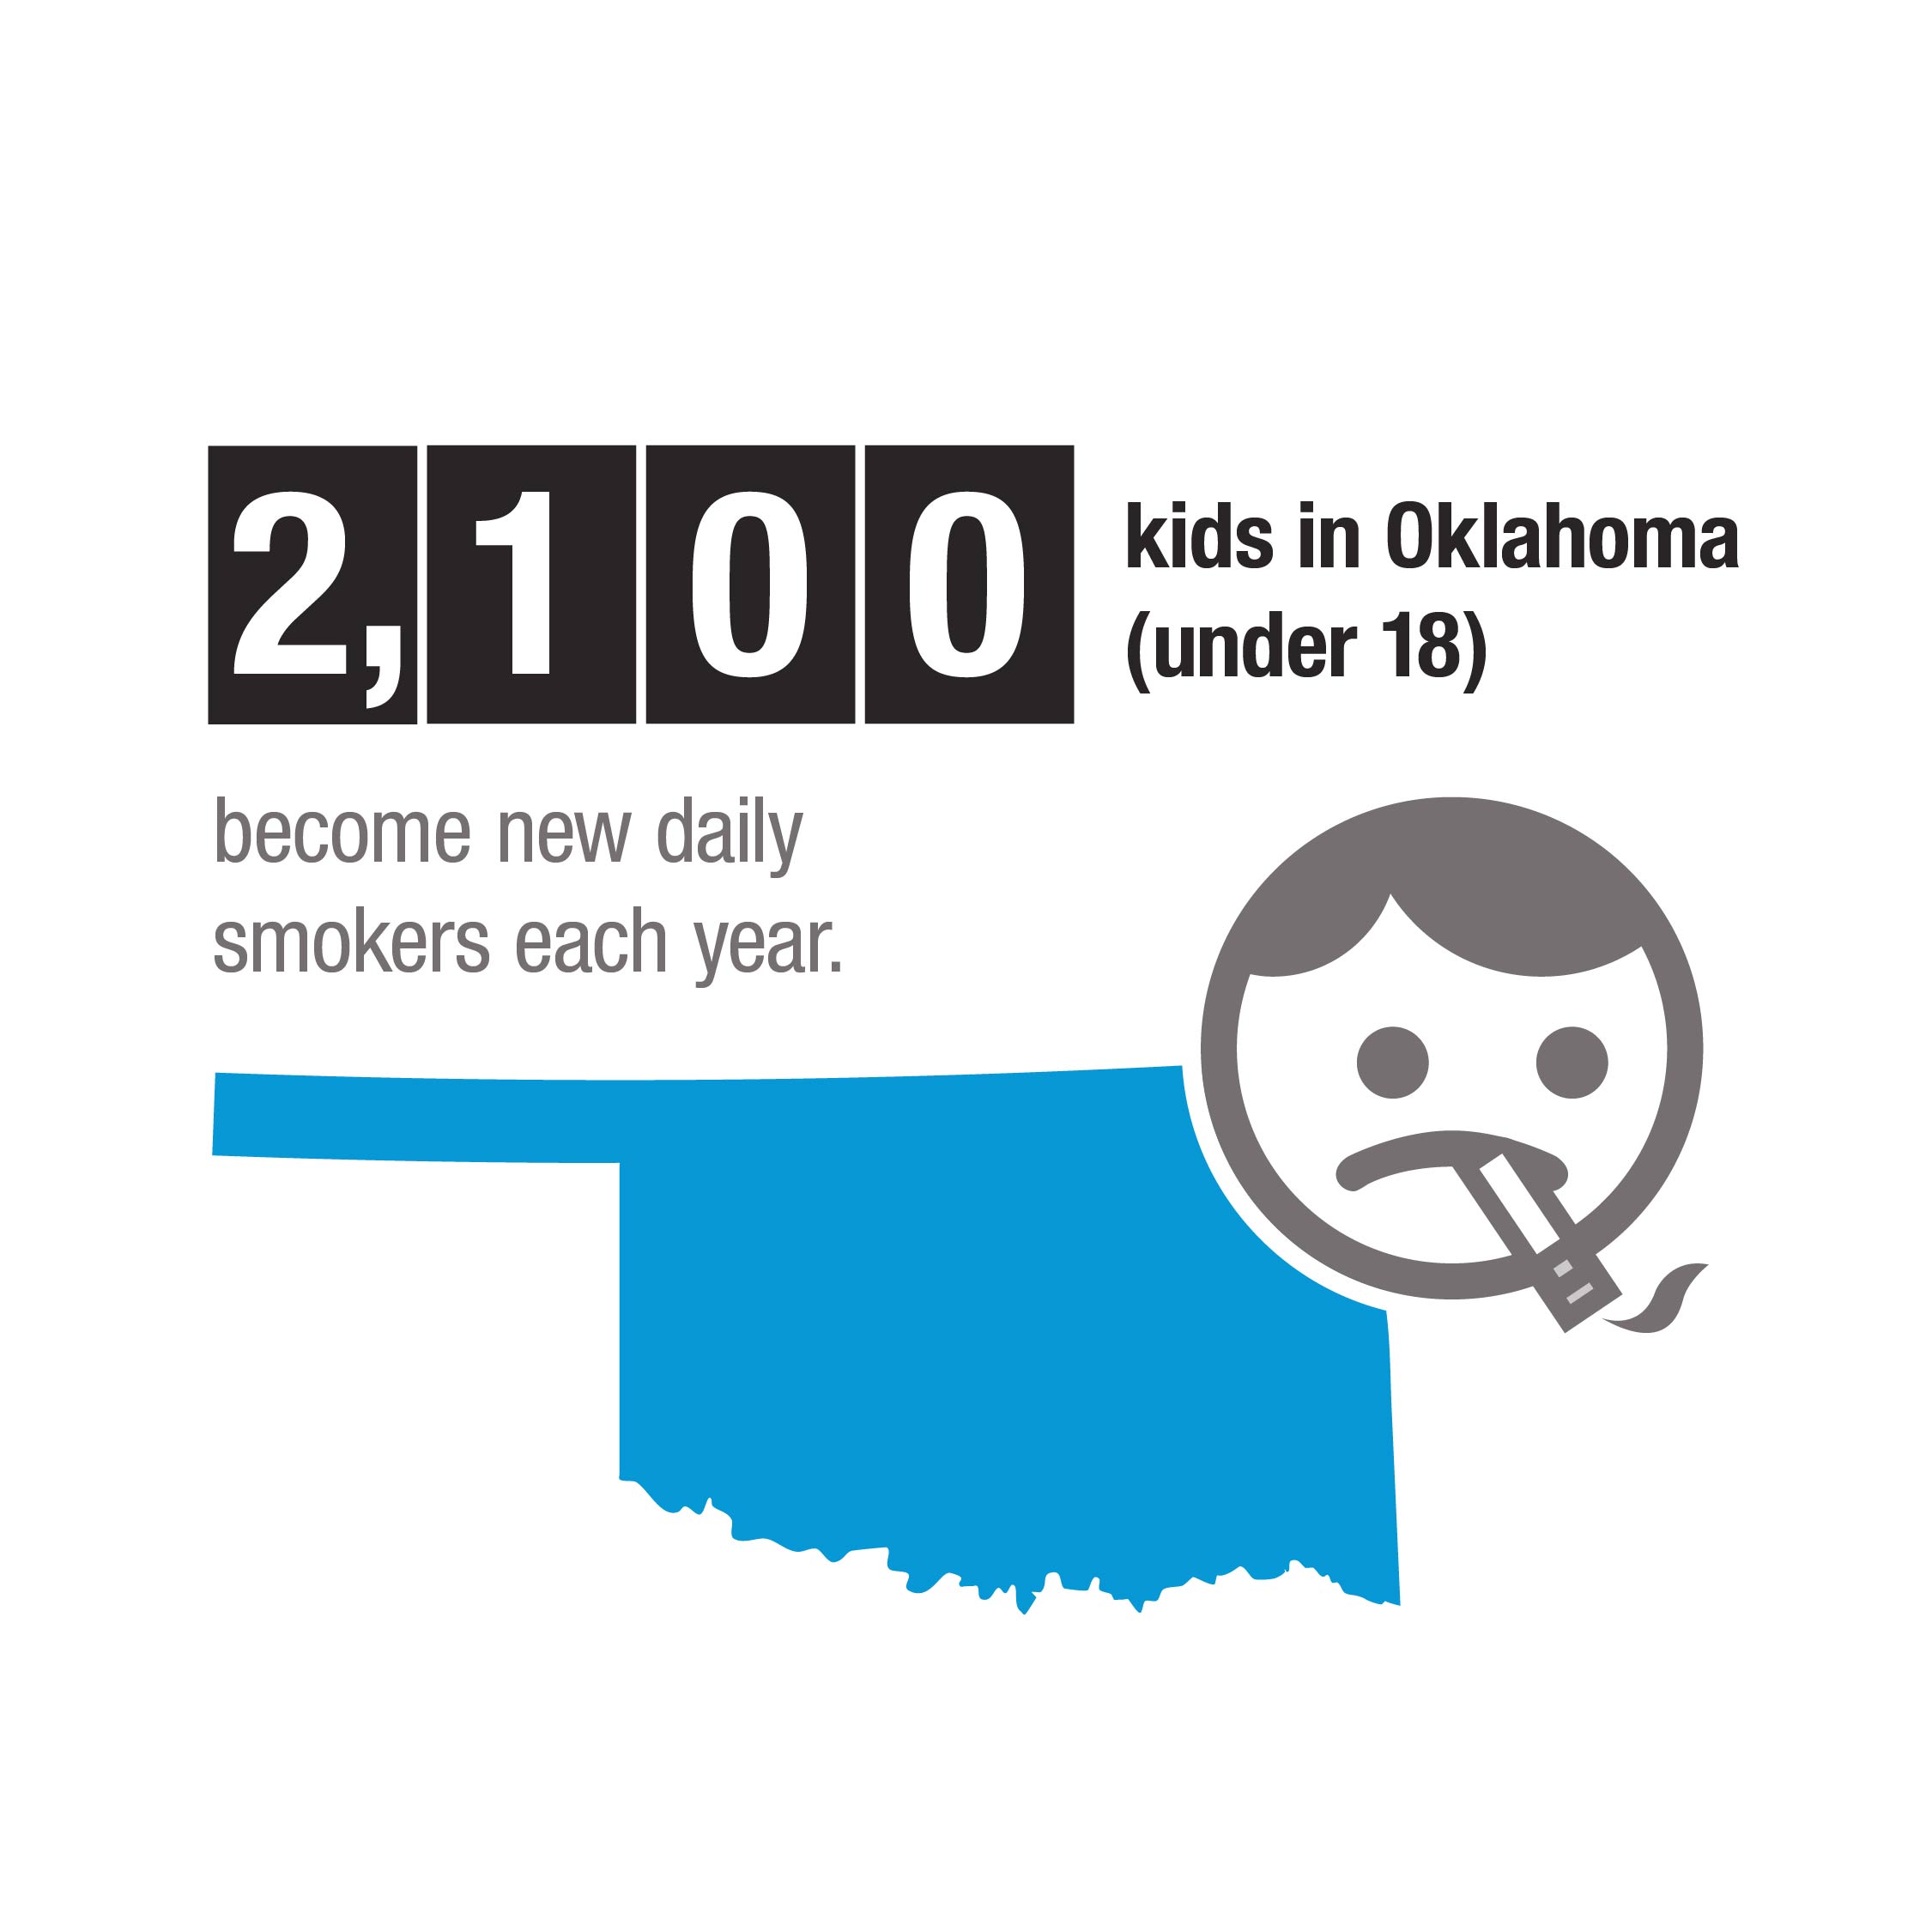 2,100 kids under 18 in Oklahoma become new daily smokers each year.